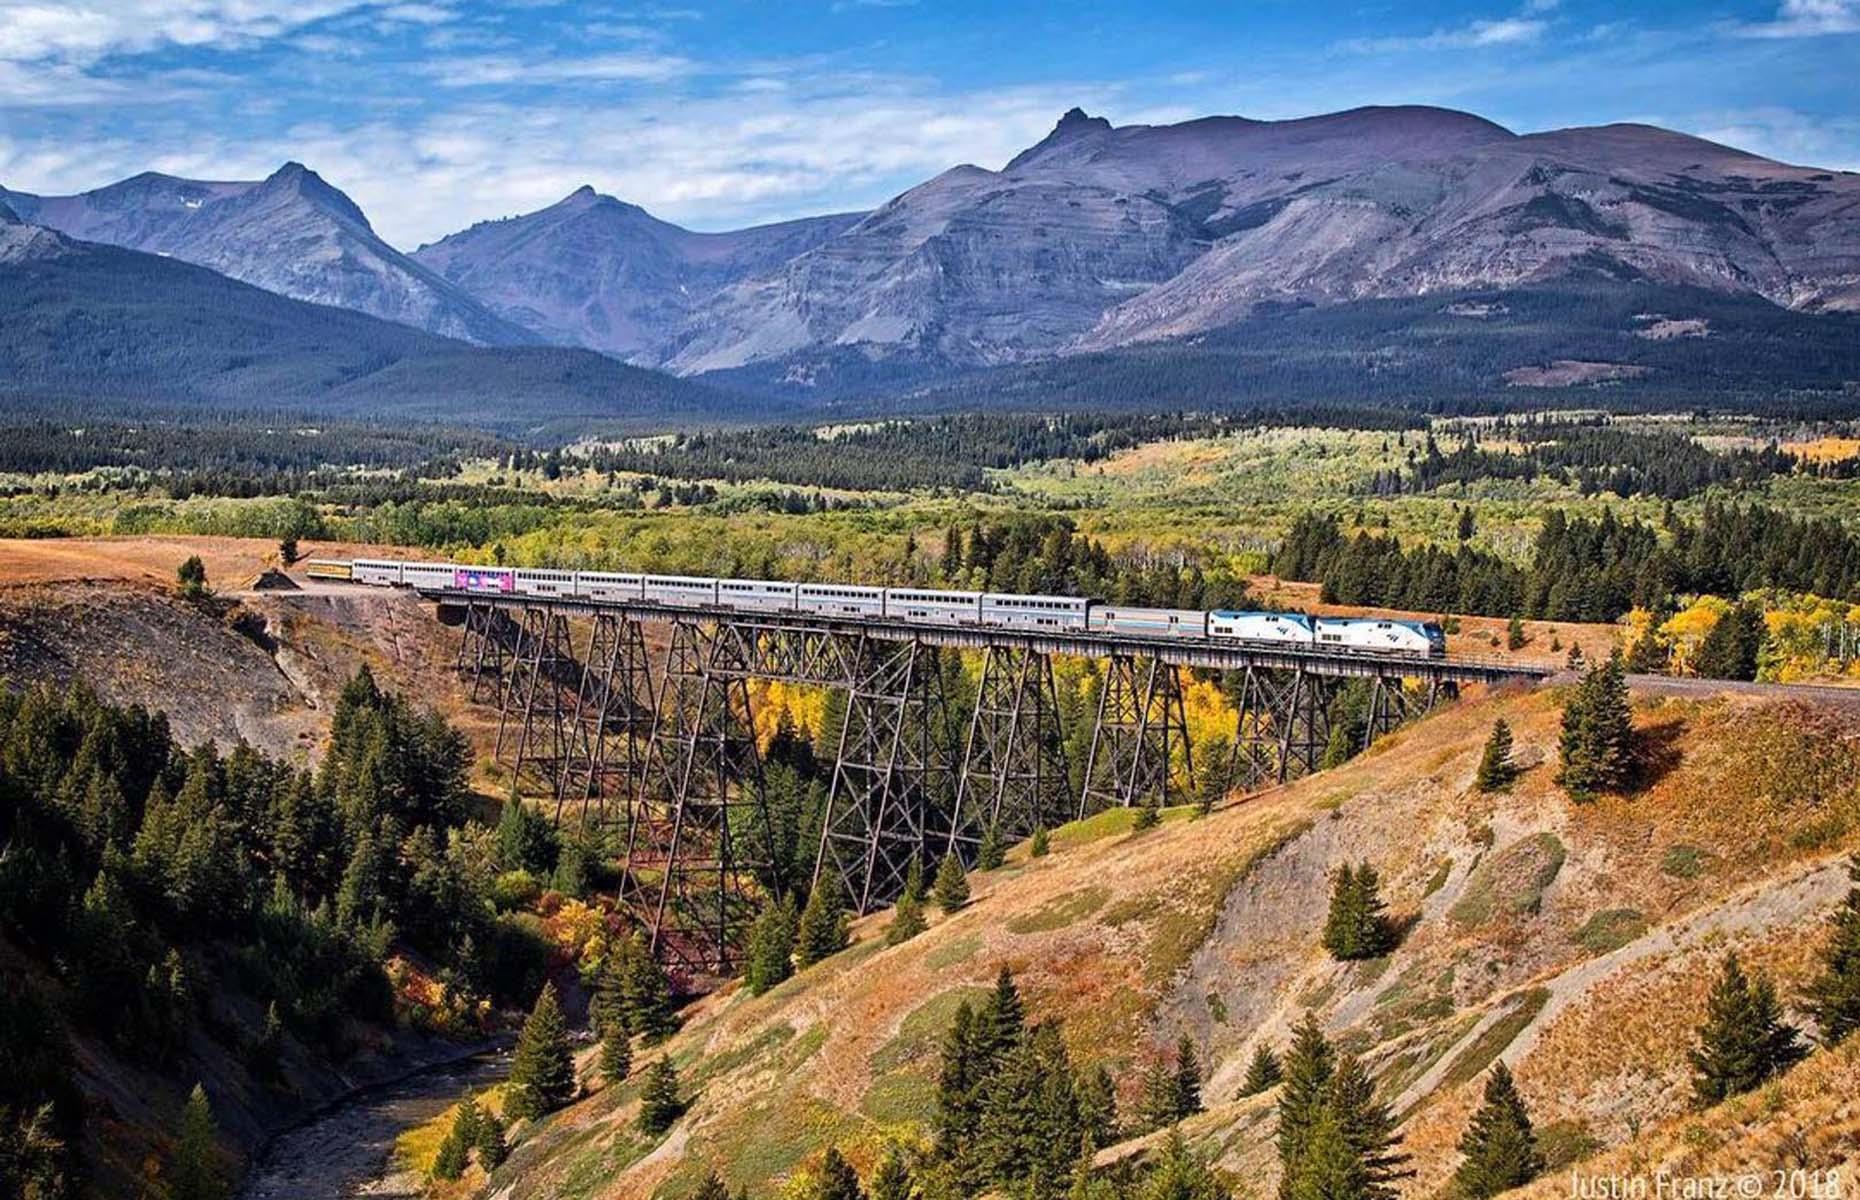 The Empire Builder is yet another of Amtrak’s epic cross-country routes covering vast swathes of the USA and incredibly varied terrain. There’s a historic dimension to the journey too, since the train follows portions of the Lewis and Clark Trail. Departing from Chicago, travelers glide past the Mississippi River before hitting the illuminated night skyline of Minneapolis and St Paul.